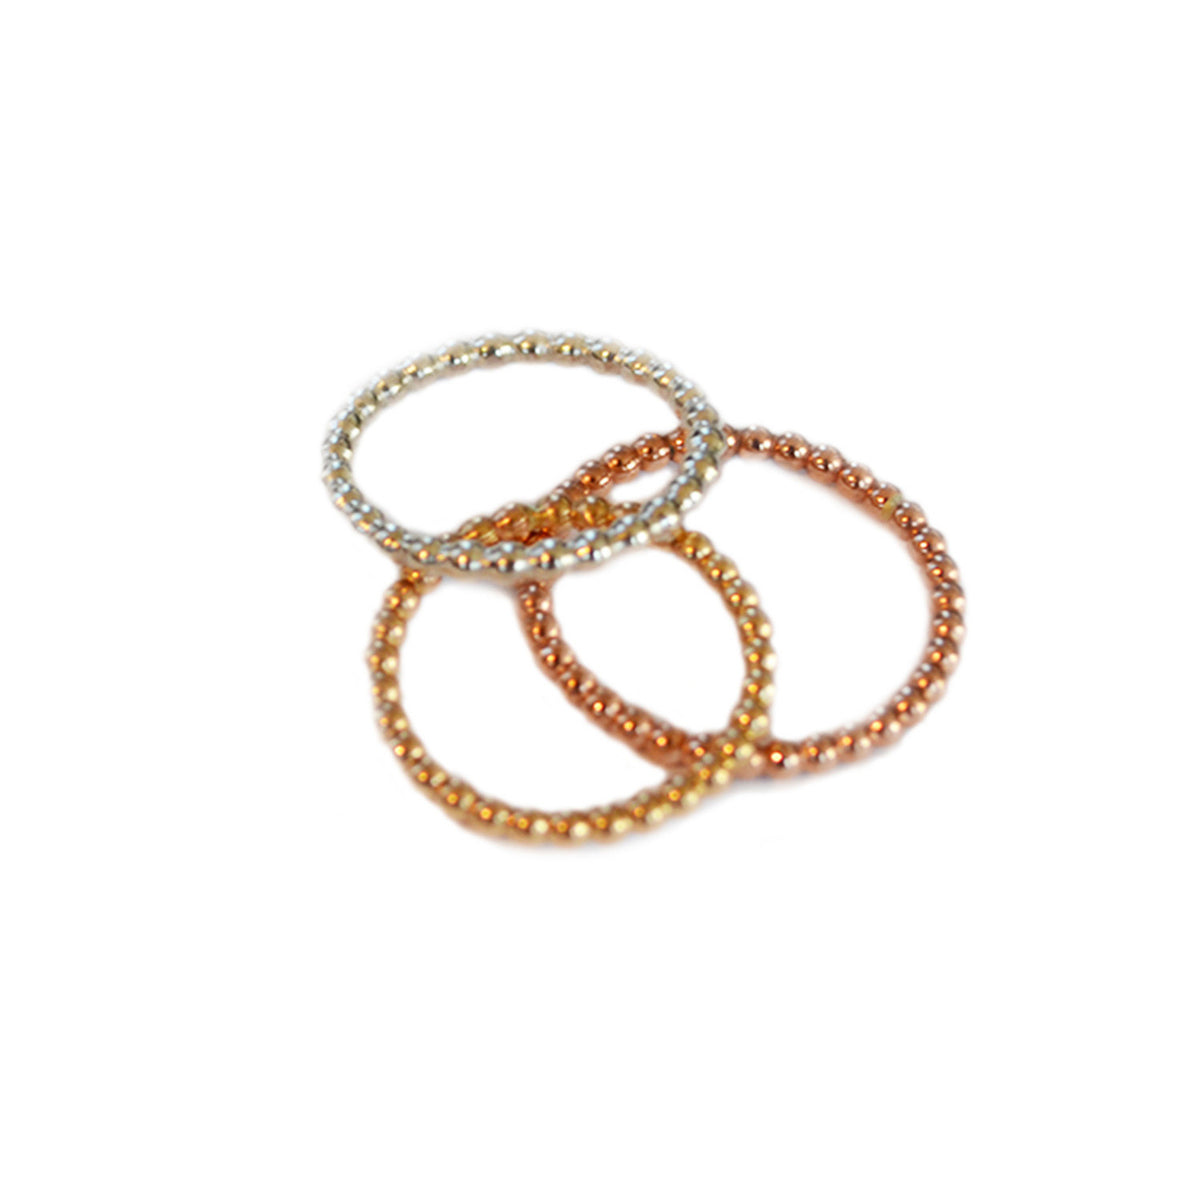 Beaded Stacking Ring, Gold, Rose Gold, or Silver